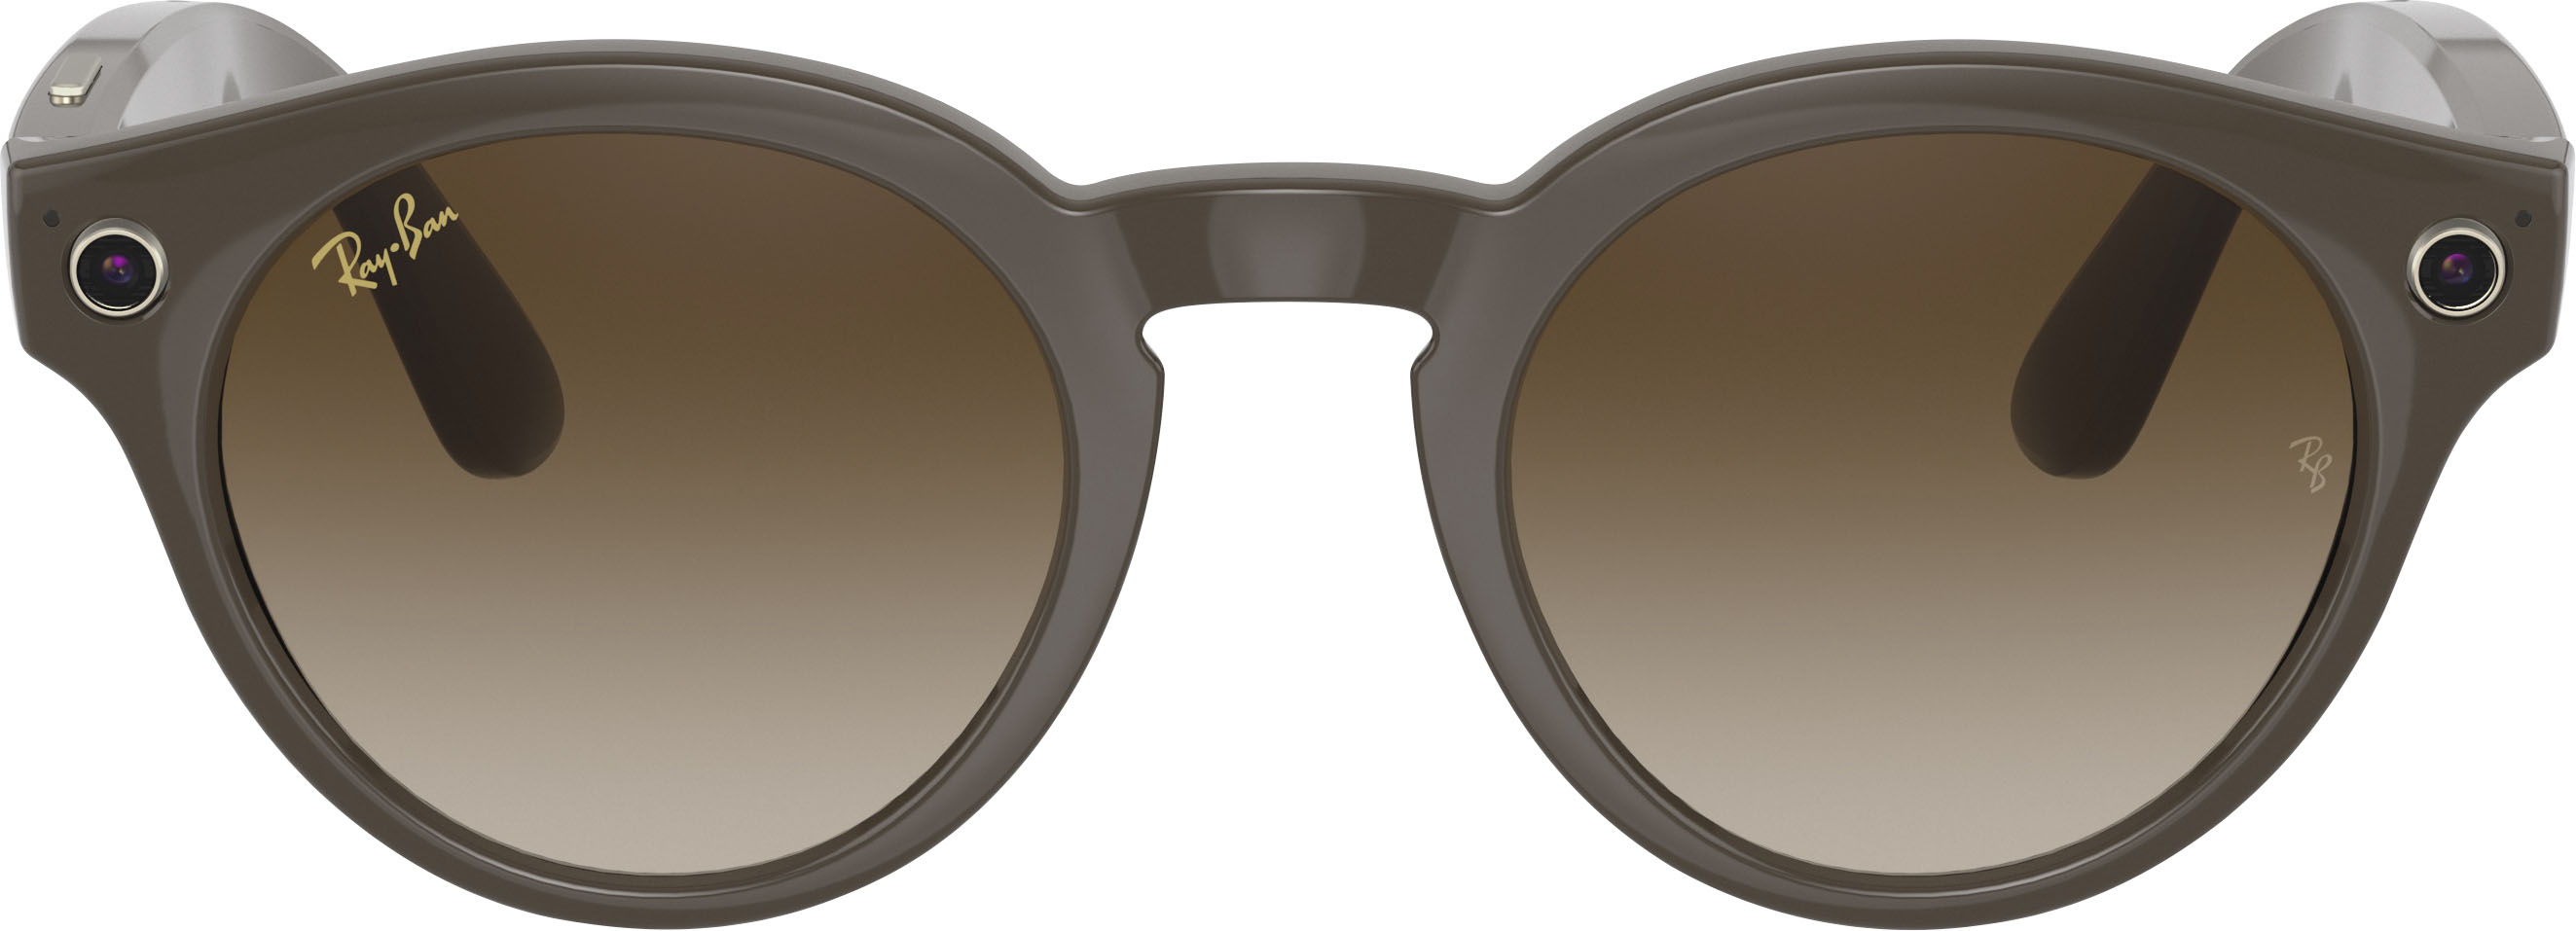 Angle View: Ray-Ban - Stories Round Smart Glasses - Shiny Brown/Brown Gradient